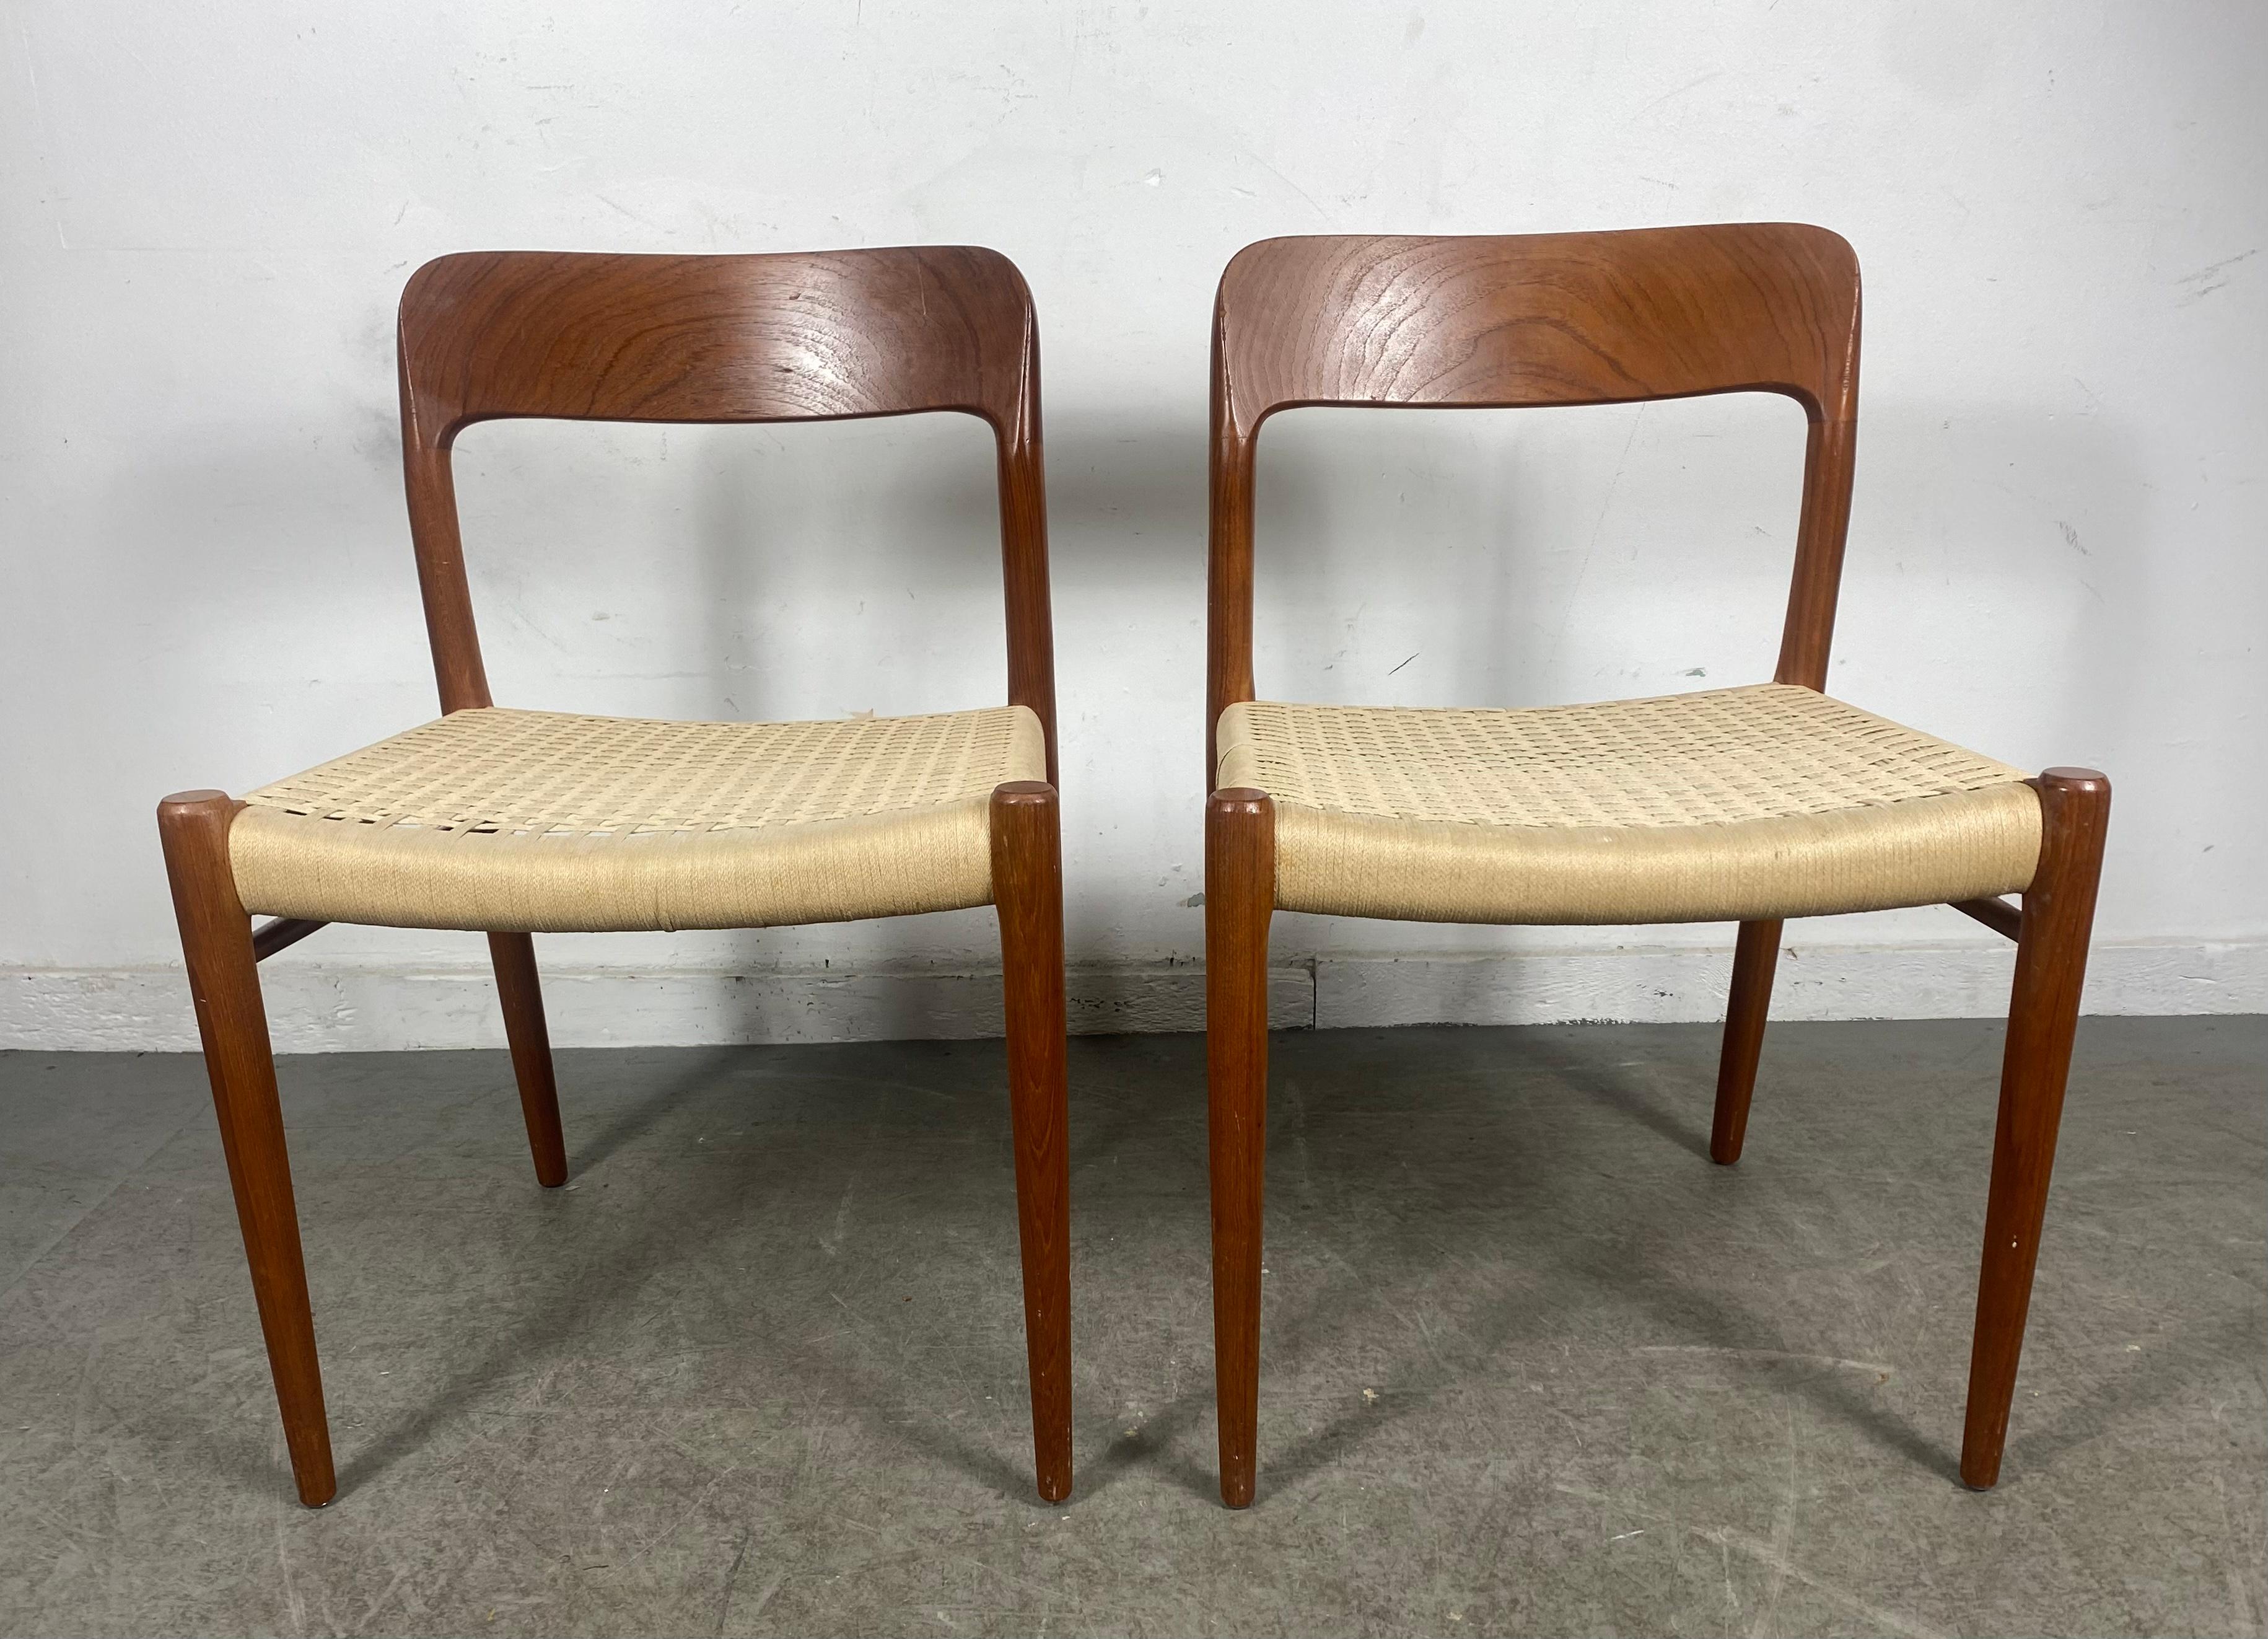 Matched pair of teak and rope side chairs made in Denmark.
Model 71, designed by Niels O. Møller. Excellant original condition.